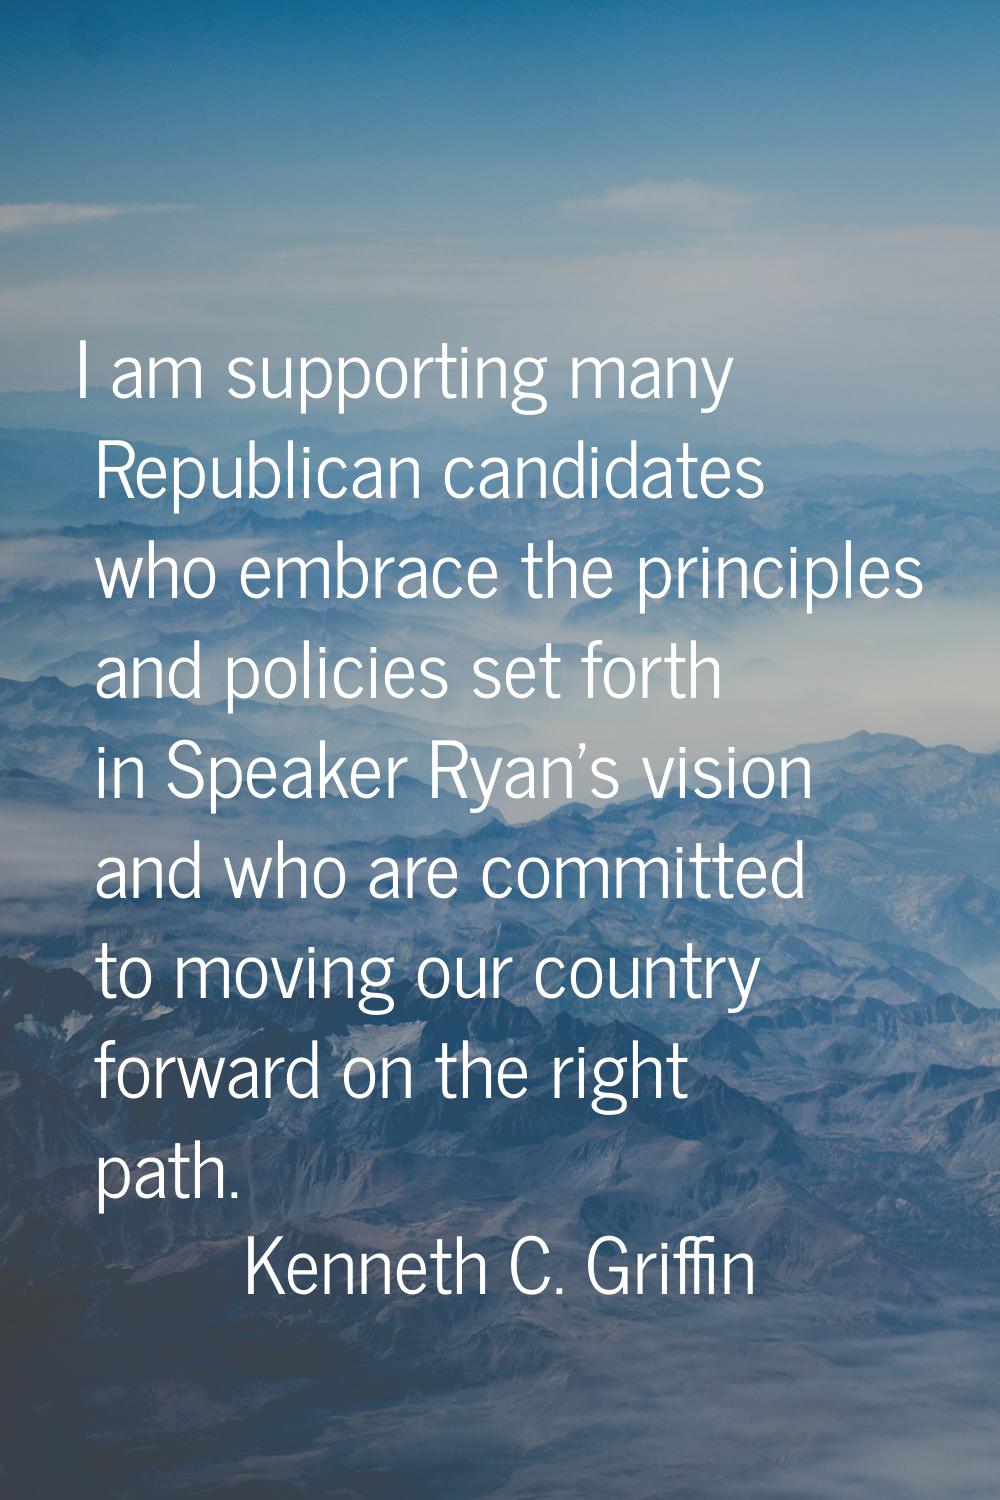 I am supporting many Republican candidates who embrace the principles and policies set forth in Spe